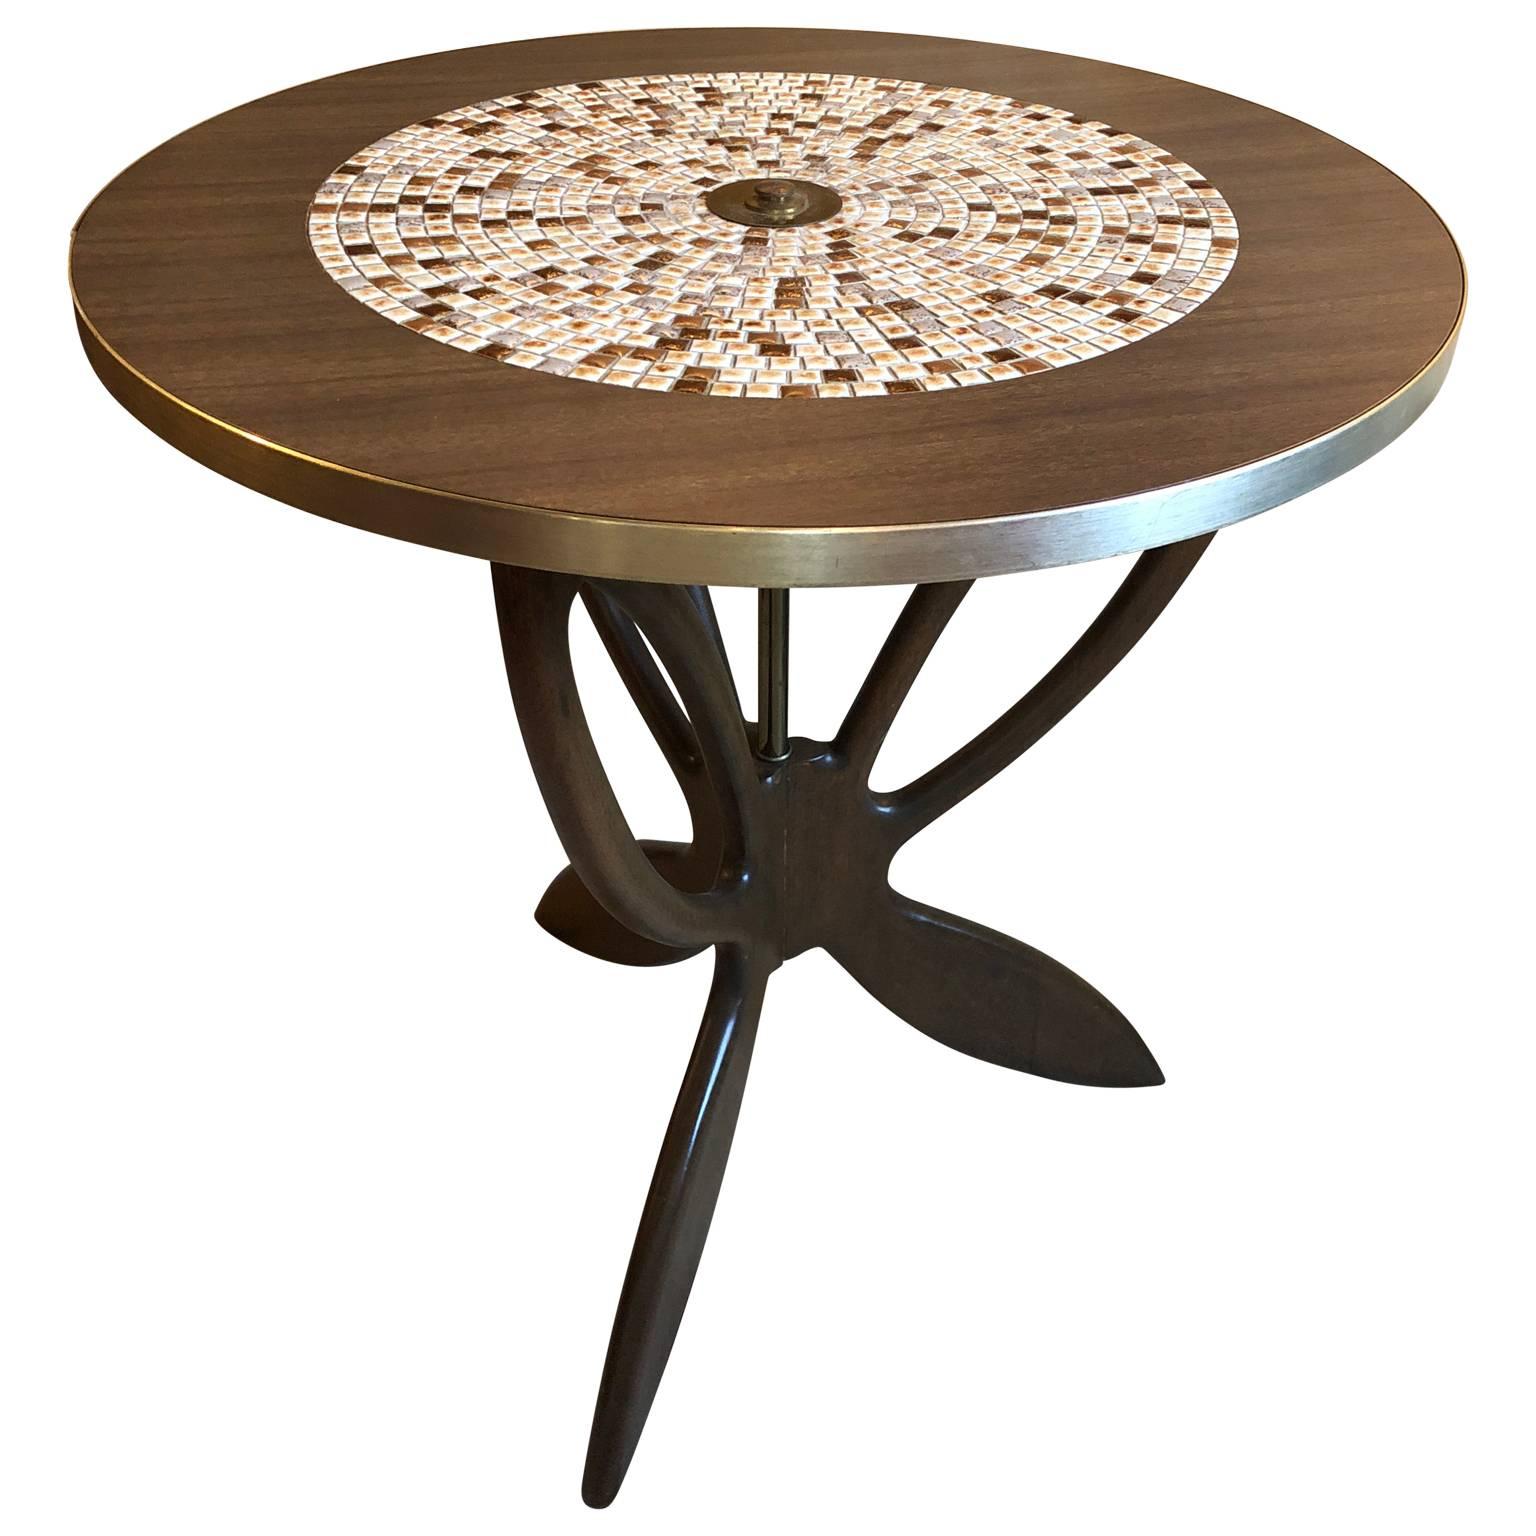 American Round Mid-Century Modern Tile Top Butterfly Cocktail Table